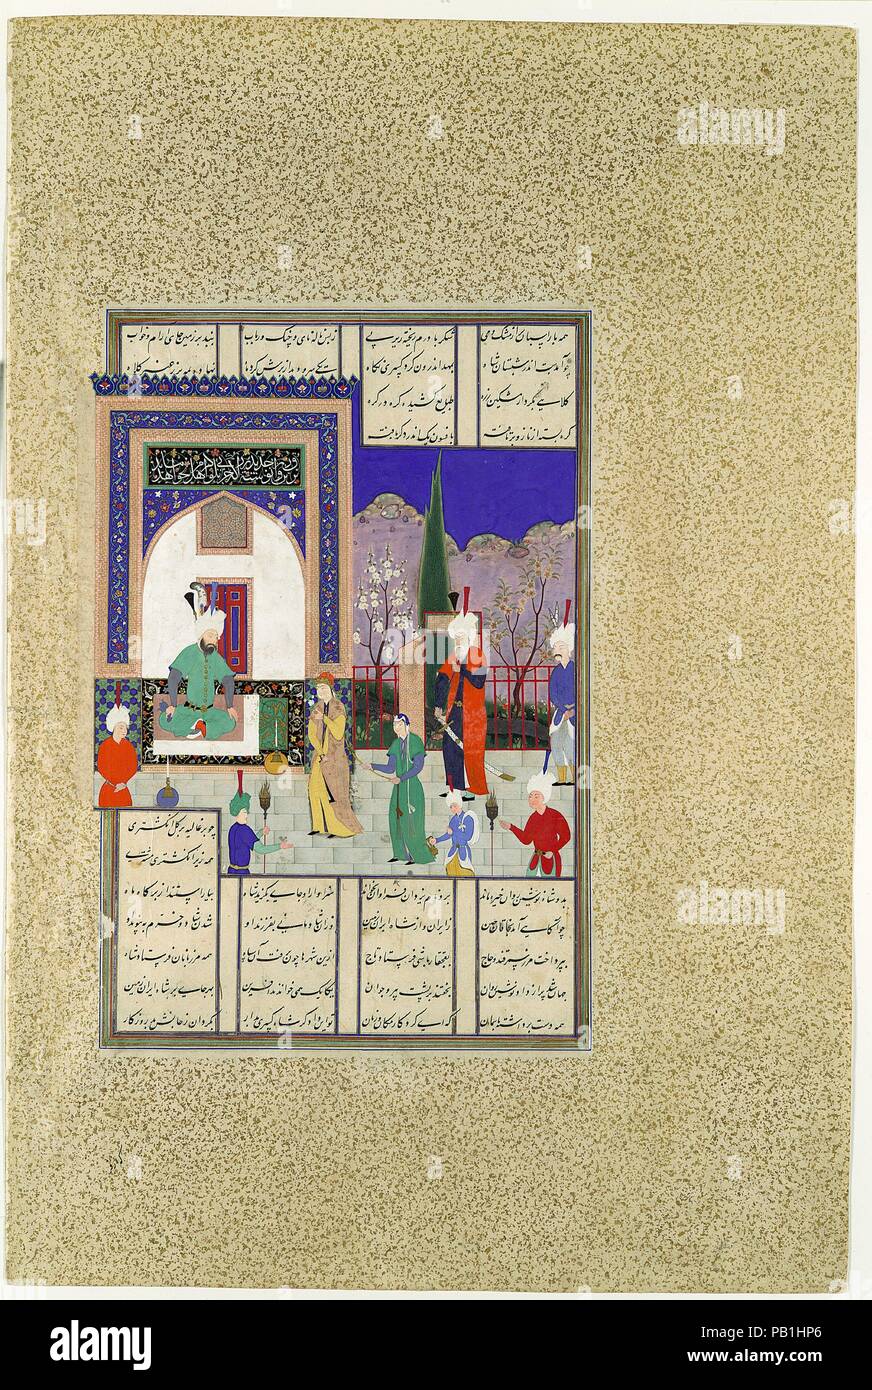 'Nushirvan Greets the Khaqan's Daughter', Folio 633v from the Shahnama (Book of Kings) of Shah Tahmasp. Artist: Painting attributed to Dust Muhammad. Author: Abu'l Qasim Firdausi (935-1020). Dimensions: Painting: H. 7 3/8 x W. 7 in. (H. 18.7 x W. 17.8 cm)  Entire Page: H. 18 5/8 x W. 12 7/16 in. (H. 47.3 x W. 31.6 cm). Date: ca. 1530-35.  When the Khaqan of Chin became aware of the greatness and power of the Iranian shah, he determined to form an alliance and offered one of his daughters in marriage to cement it. Nushirvan accepted the offer, but sent a wise envoy to choose the best of the Kha Stock Photo